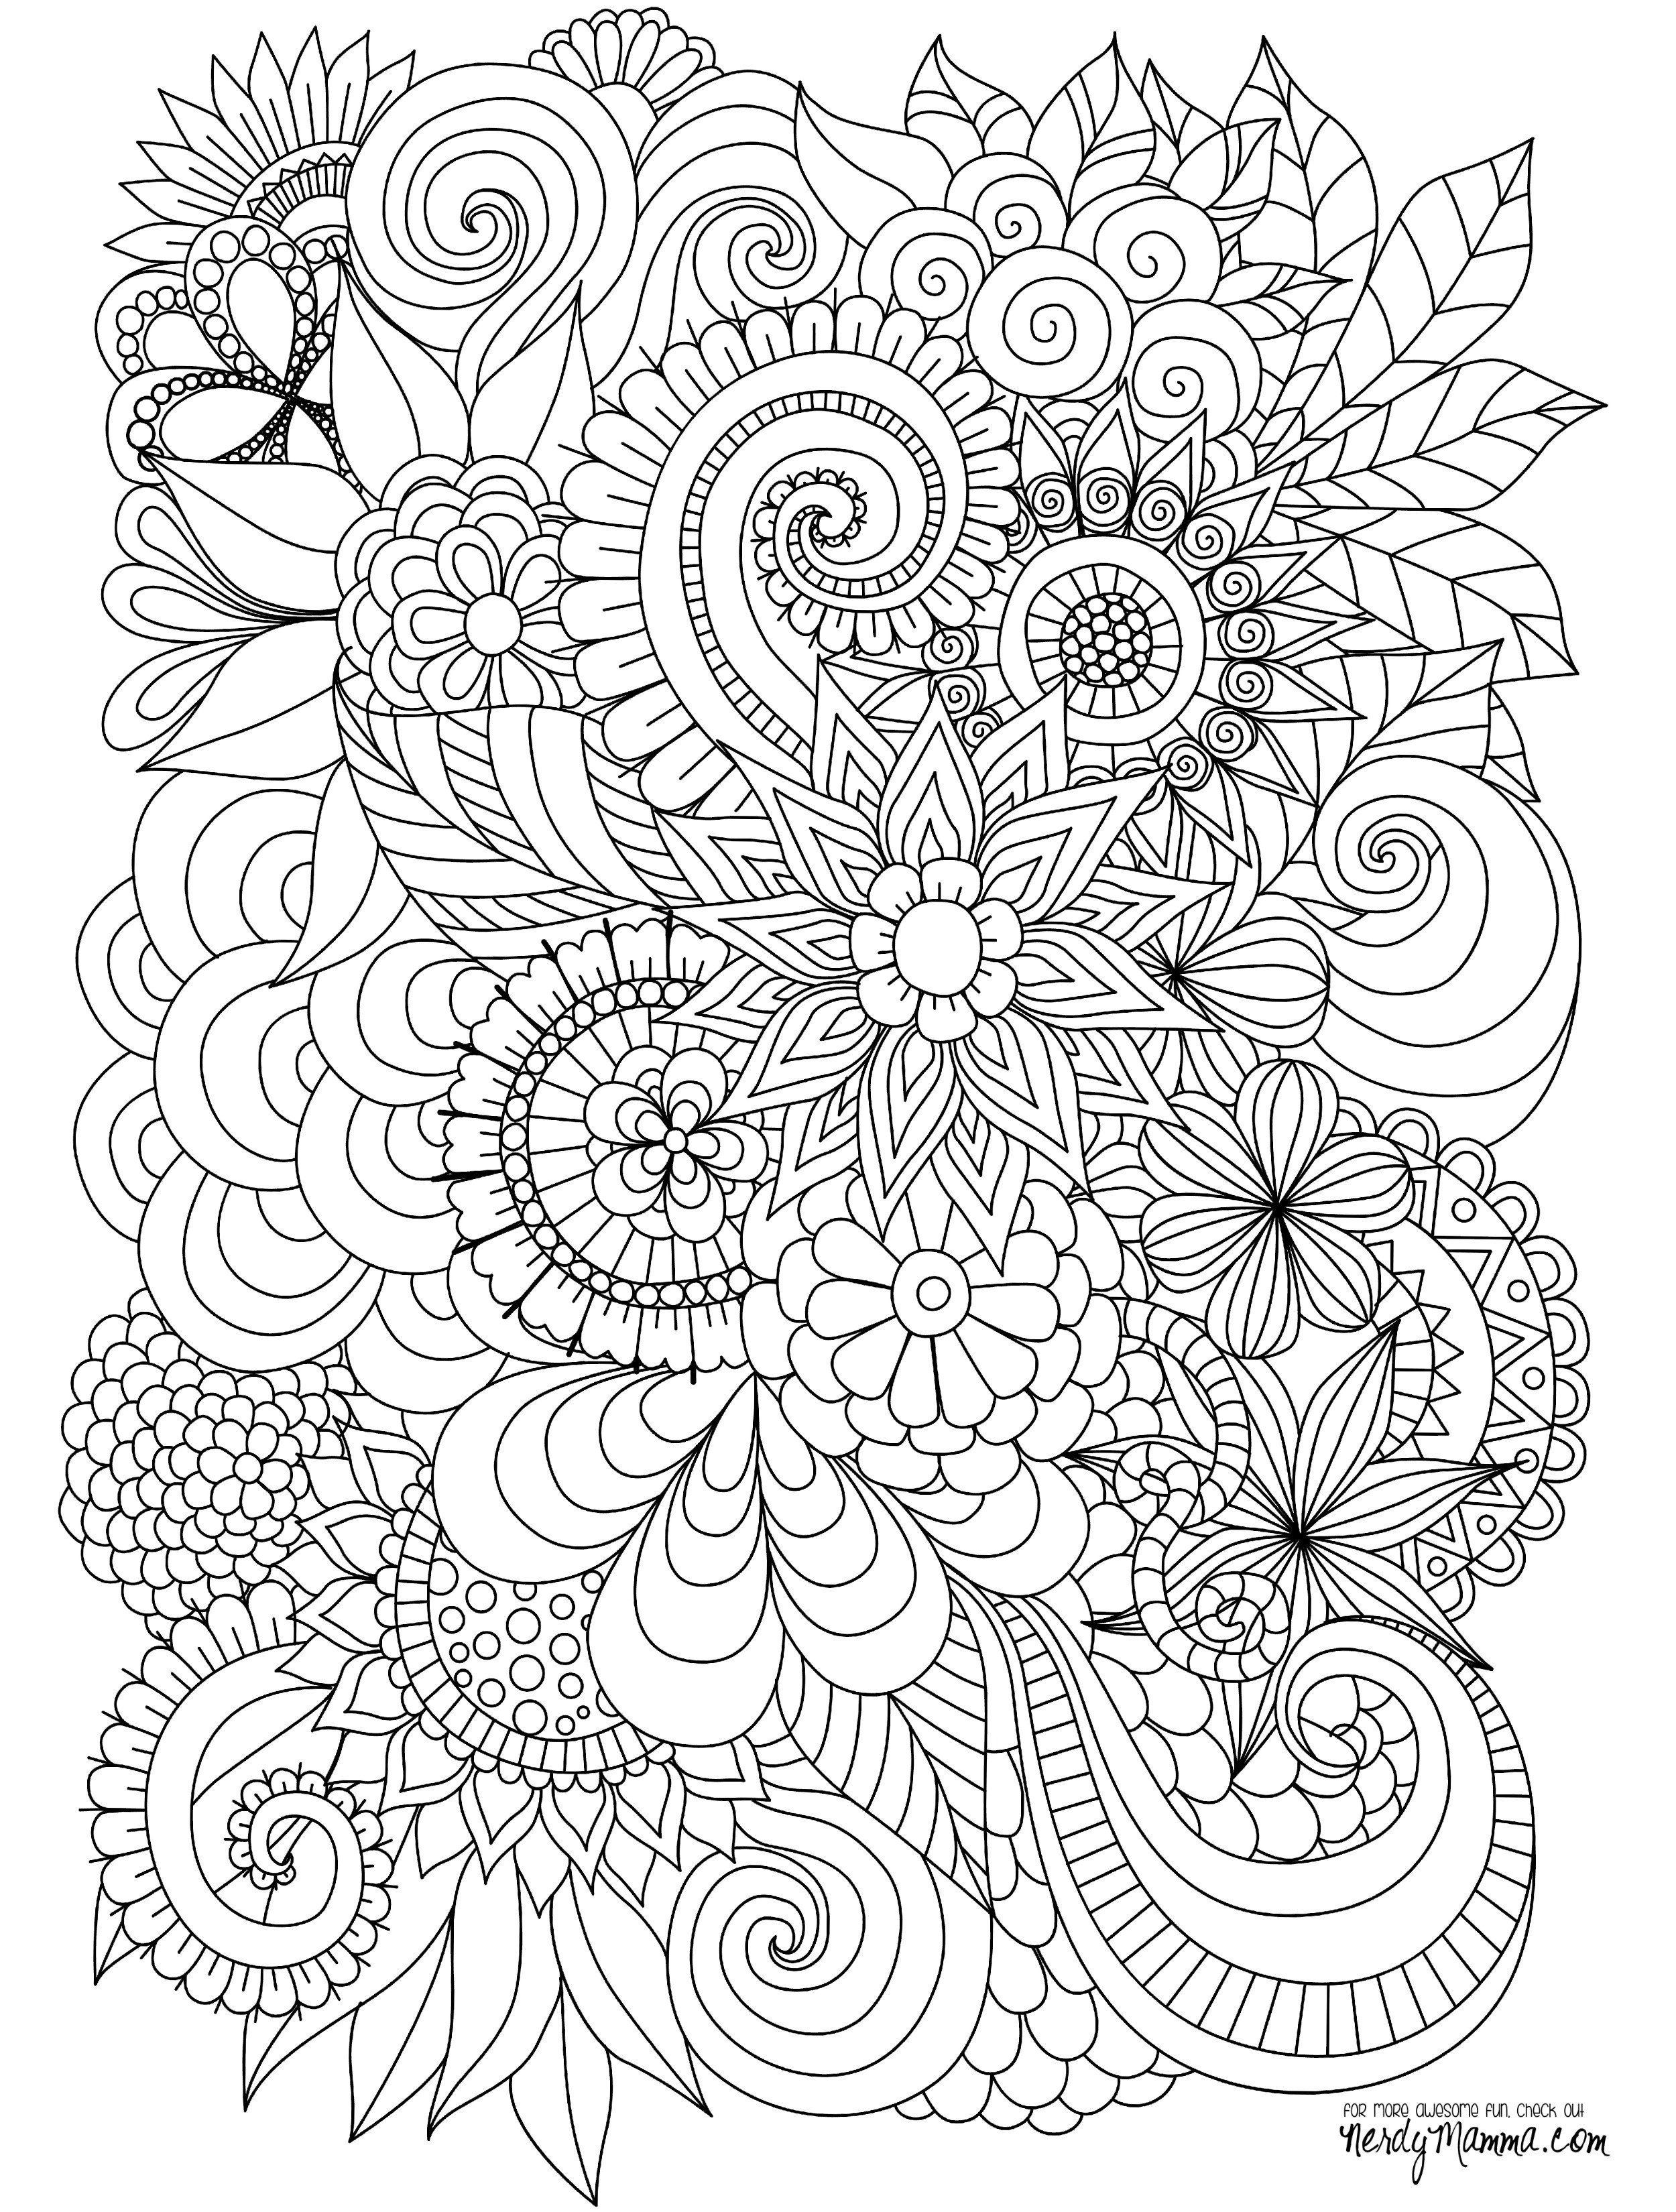 Zentangle Patterns Coloring Pages at GetColorings.com ...